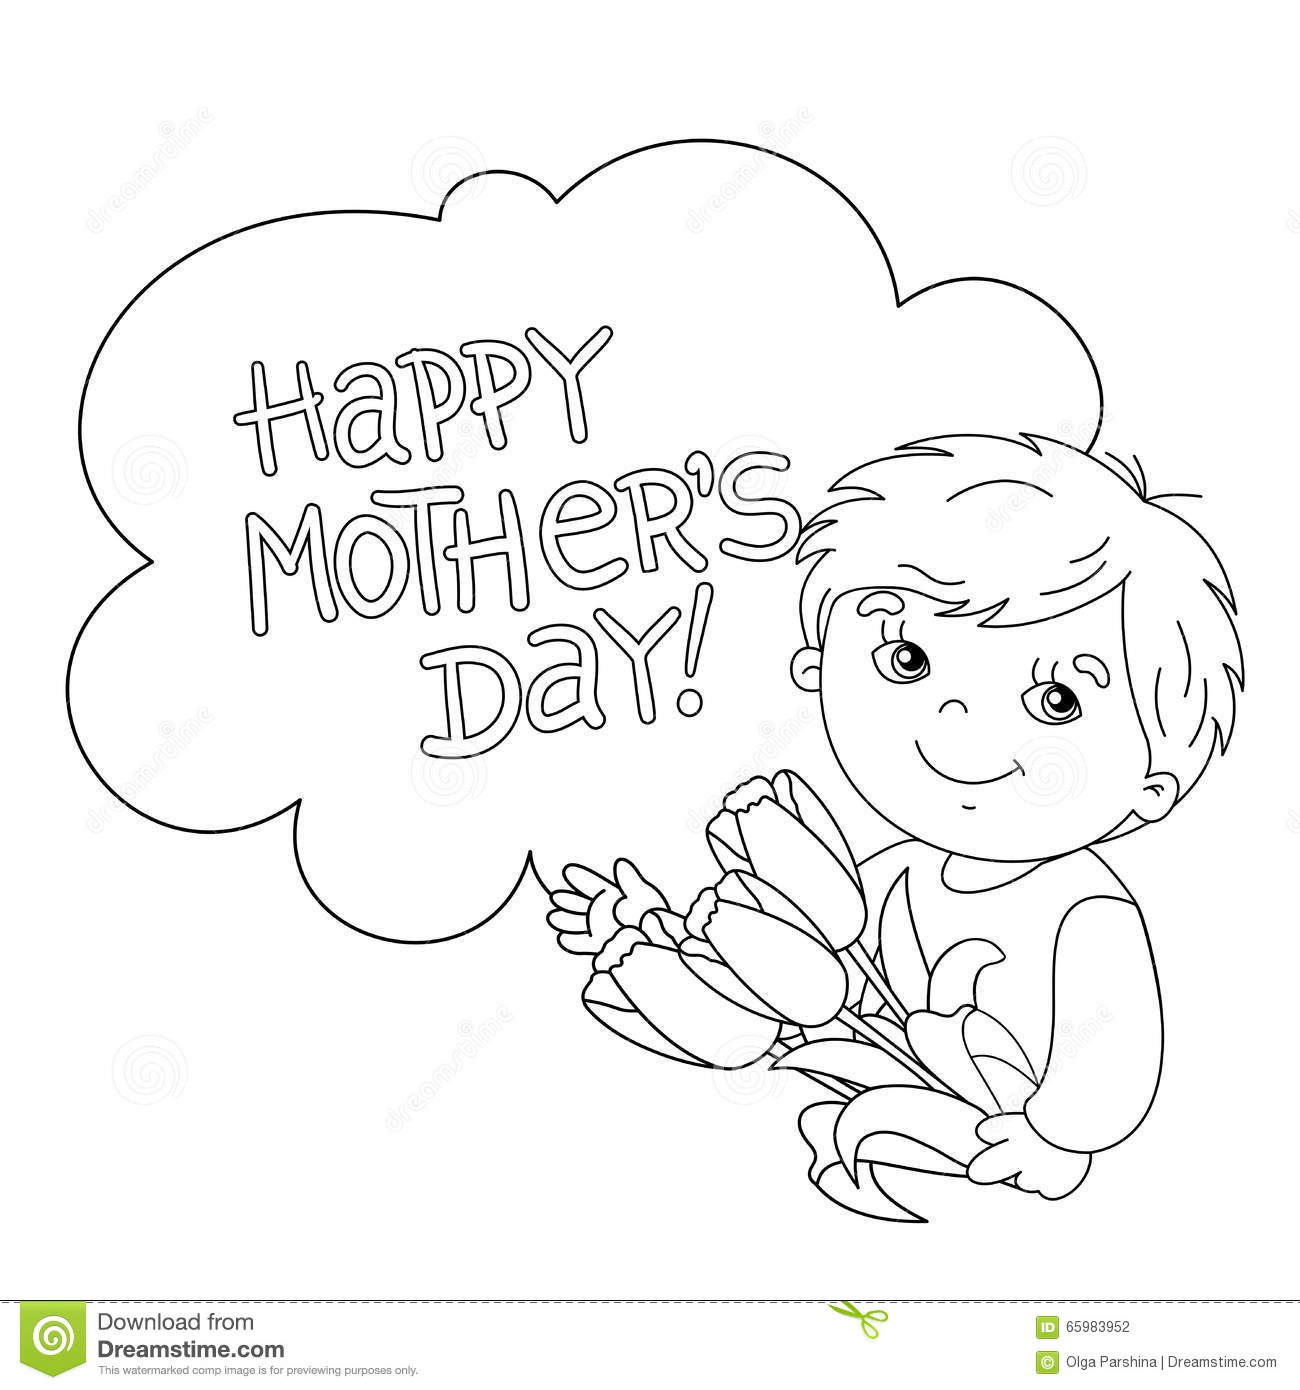 Boys Mothers Day Coloring Sheets
 Coloring Page Outline Boy With Flowers Mother s Day